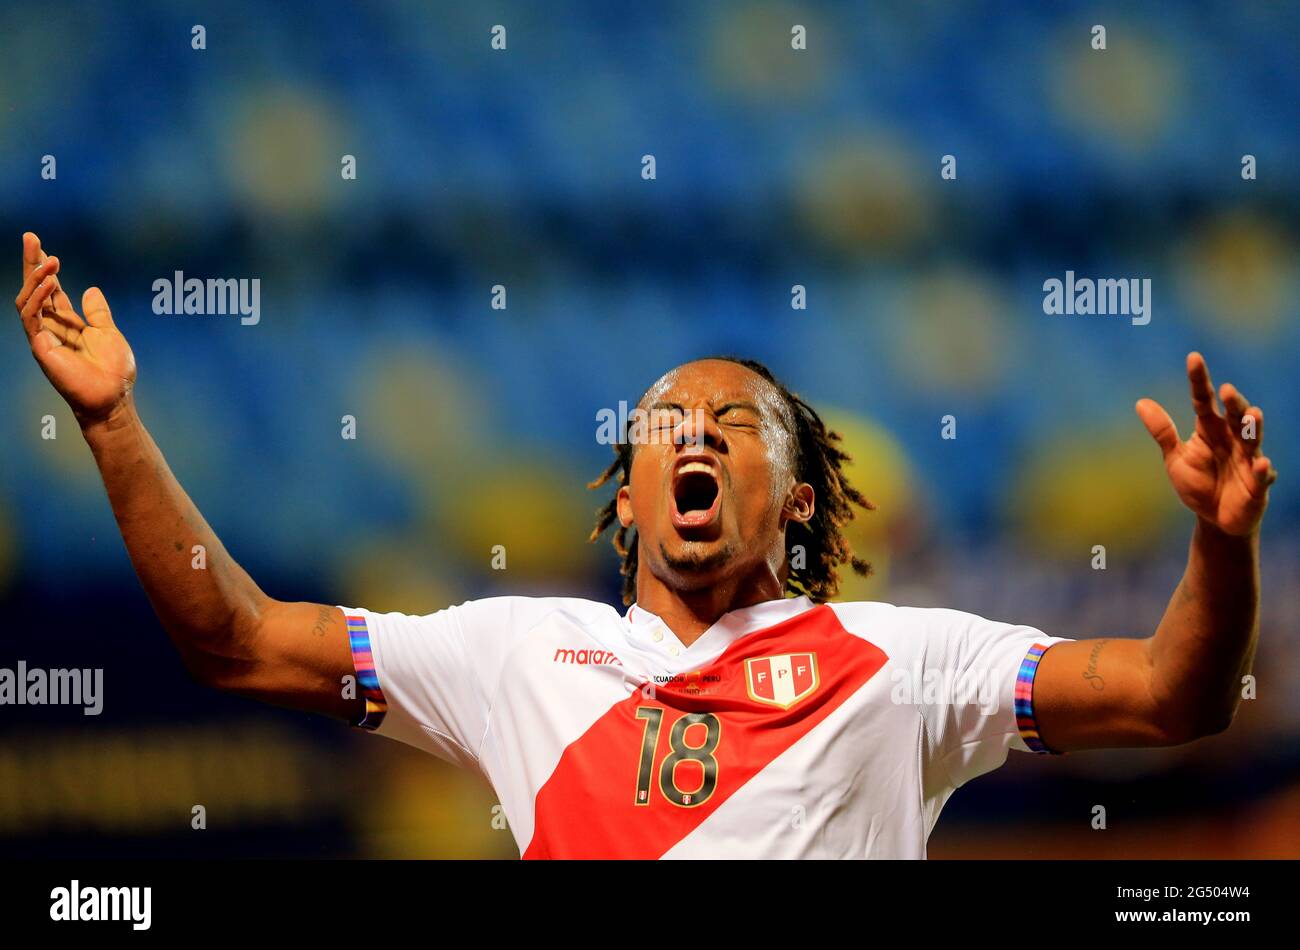 GOIANIA, BRAZIL - JUNE 23: Andre Carrillo of Peru celebrates after scores his gol ,during the match between Colombia and Peru as part of Conmebol Copa America Brazil 2021 at Estadio Olimpico on June 23, 2021 in Goiania, Brazil. MB Media Stock Photo